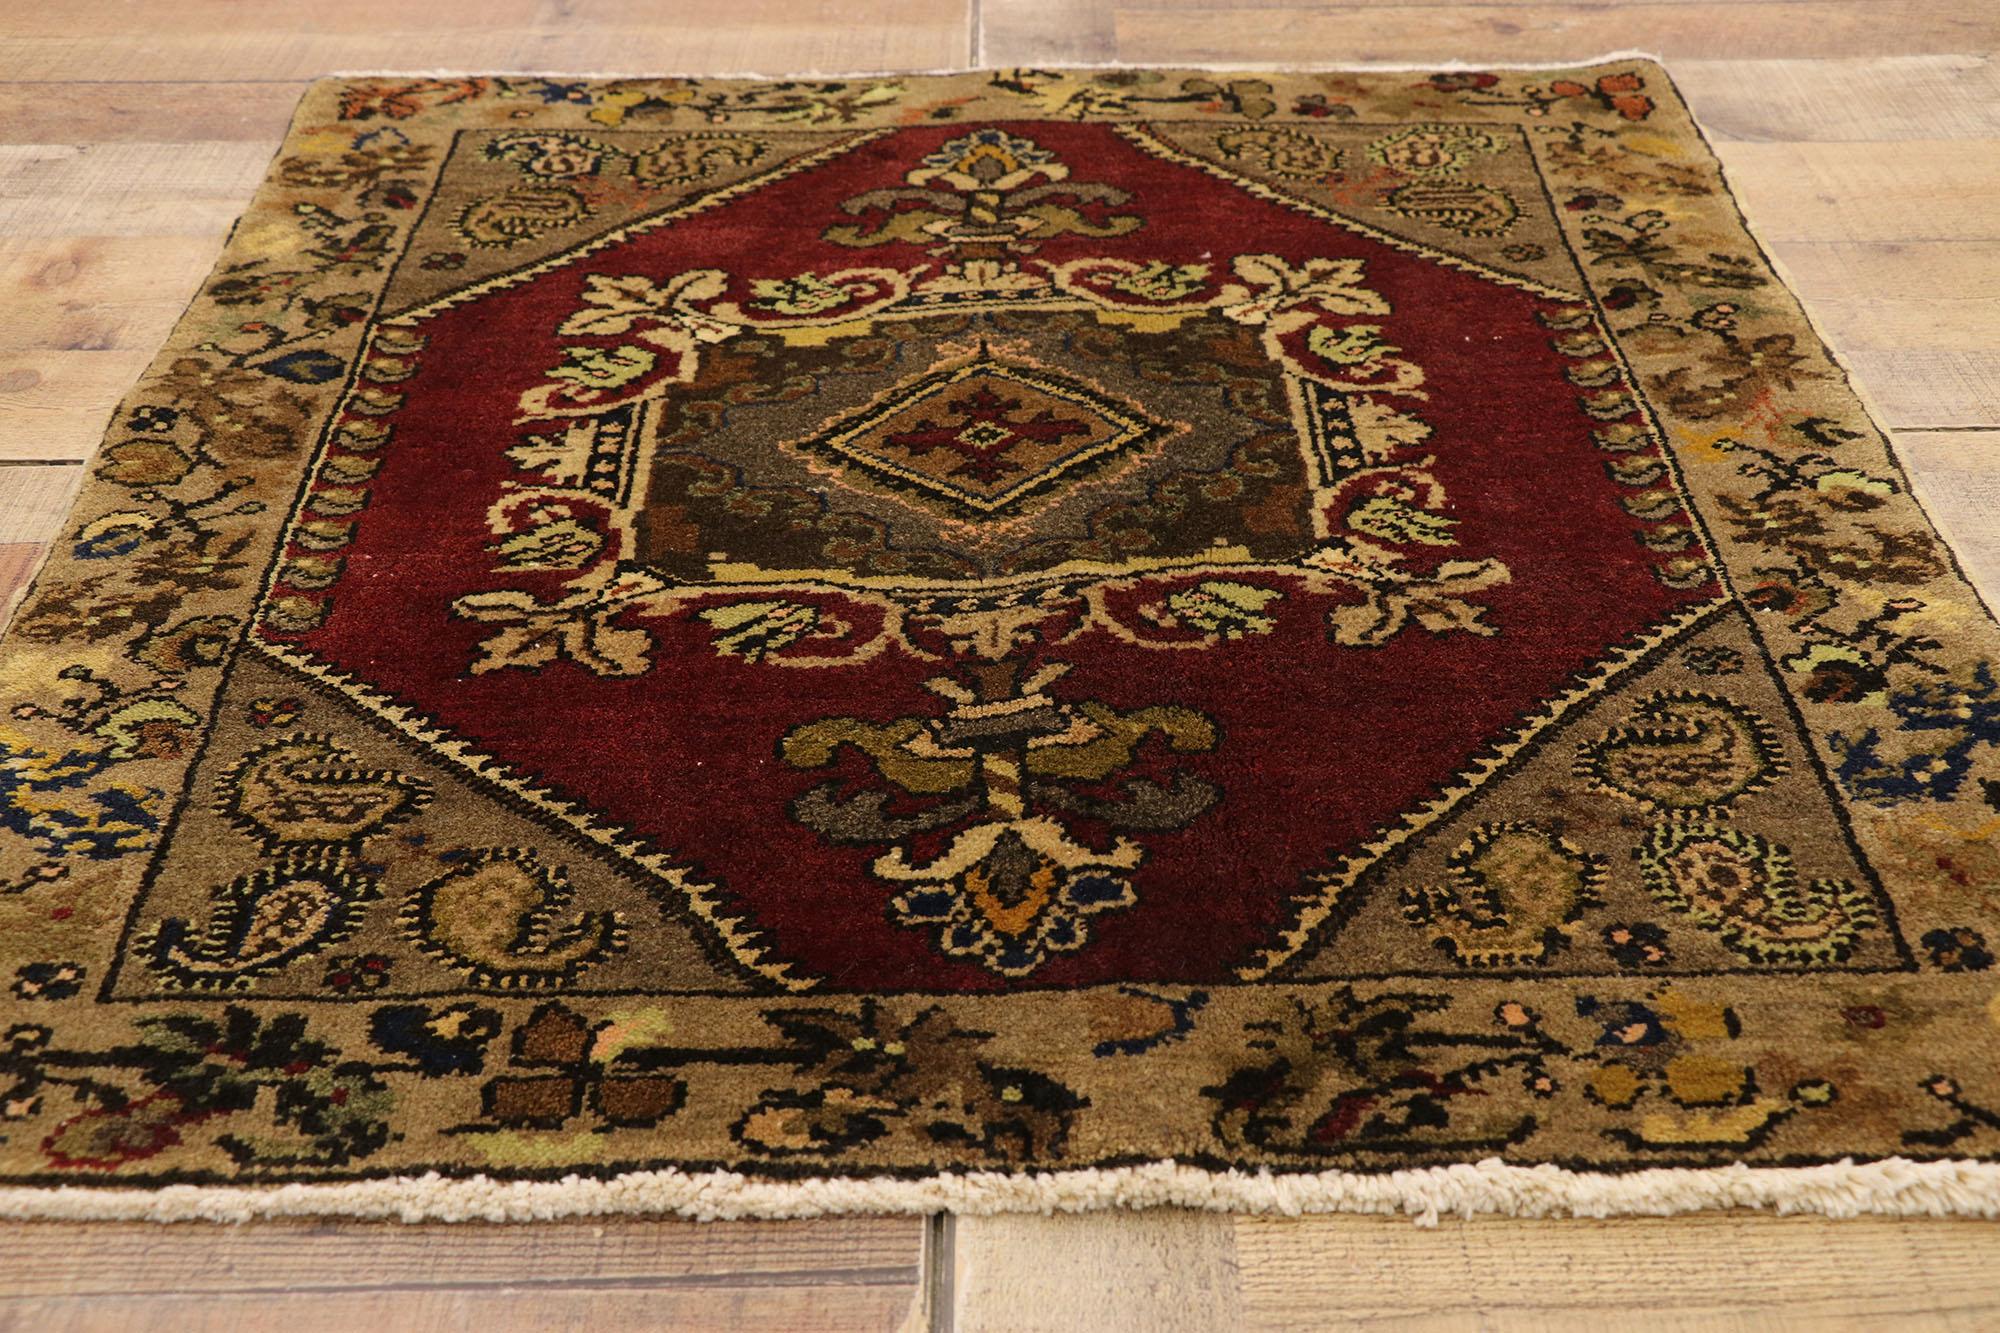 Pair of Vintage Turkish Oushak Yastik Scatter Rugs, Matching Small Accent Rugs 9